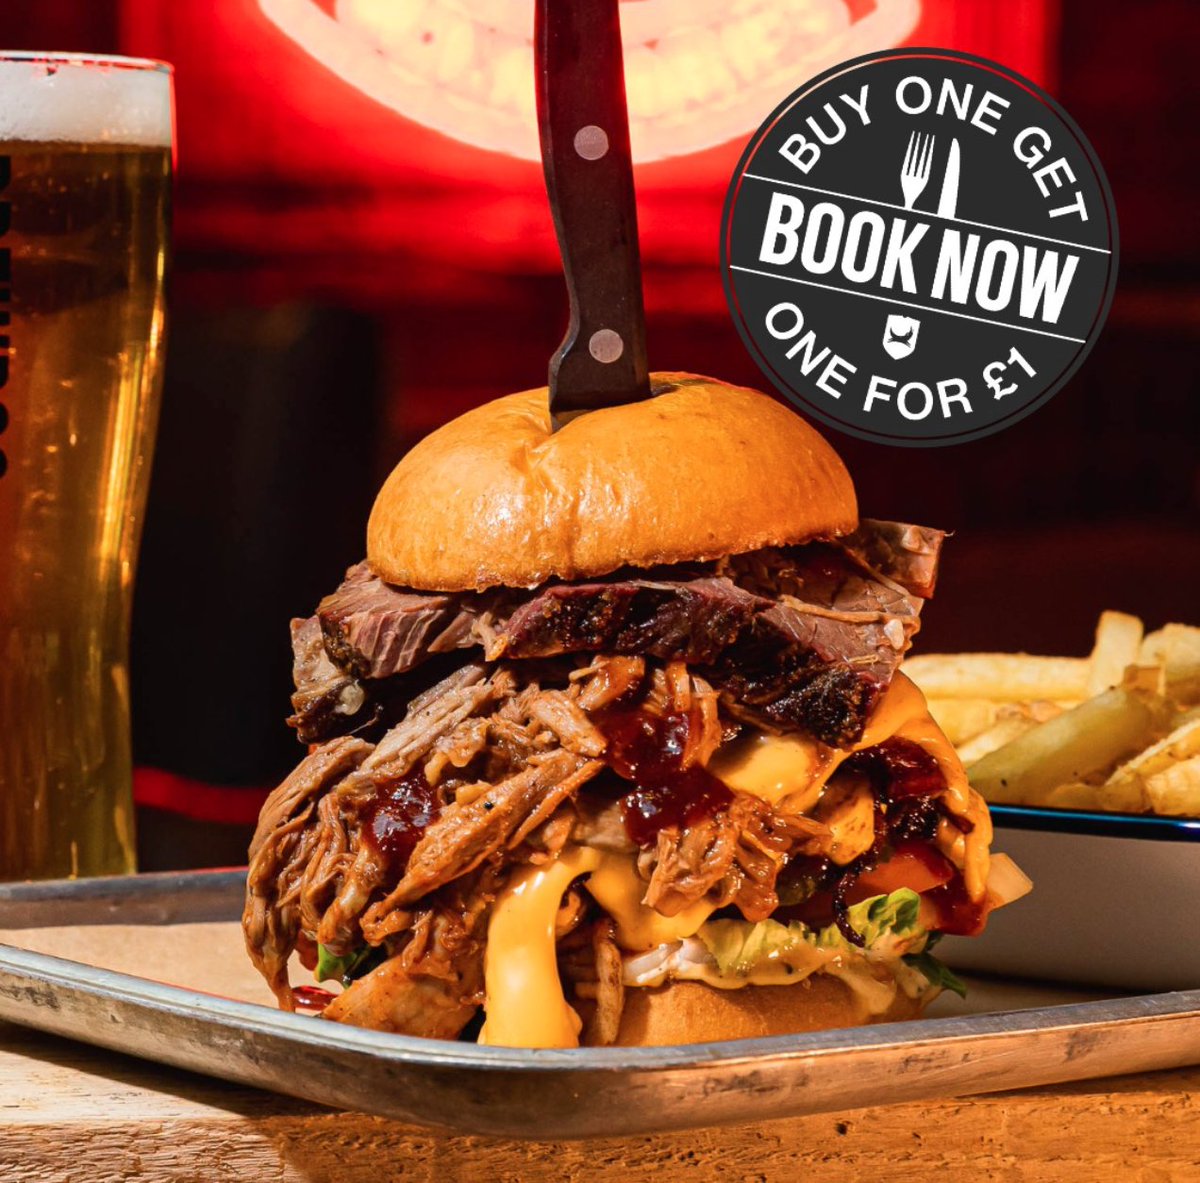 Buy one, get one for just £1!🤩 Available all through January, grab a mate and get them one of our delicious burgers for just a £1!🤤 Or just have two for yourself😉 #brewdogbradford #bradfordbar #burgerdeals